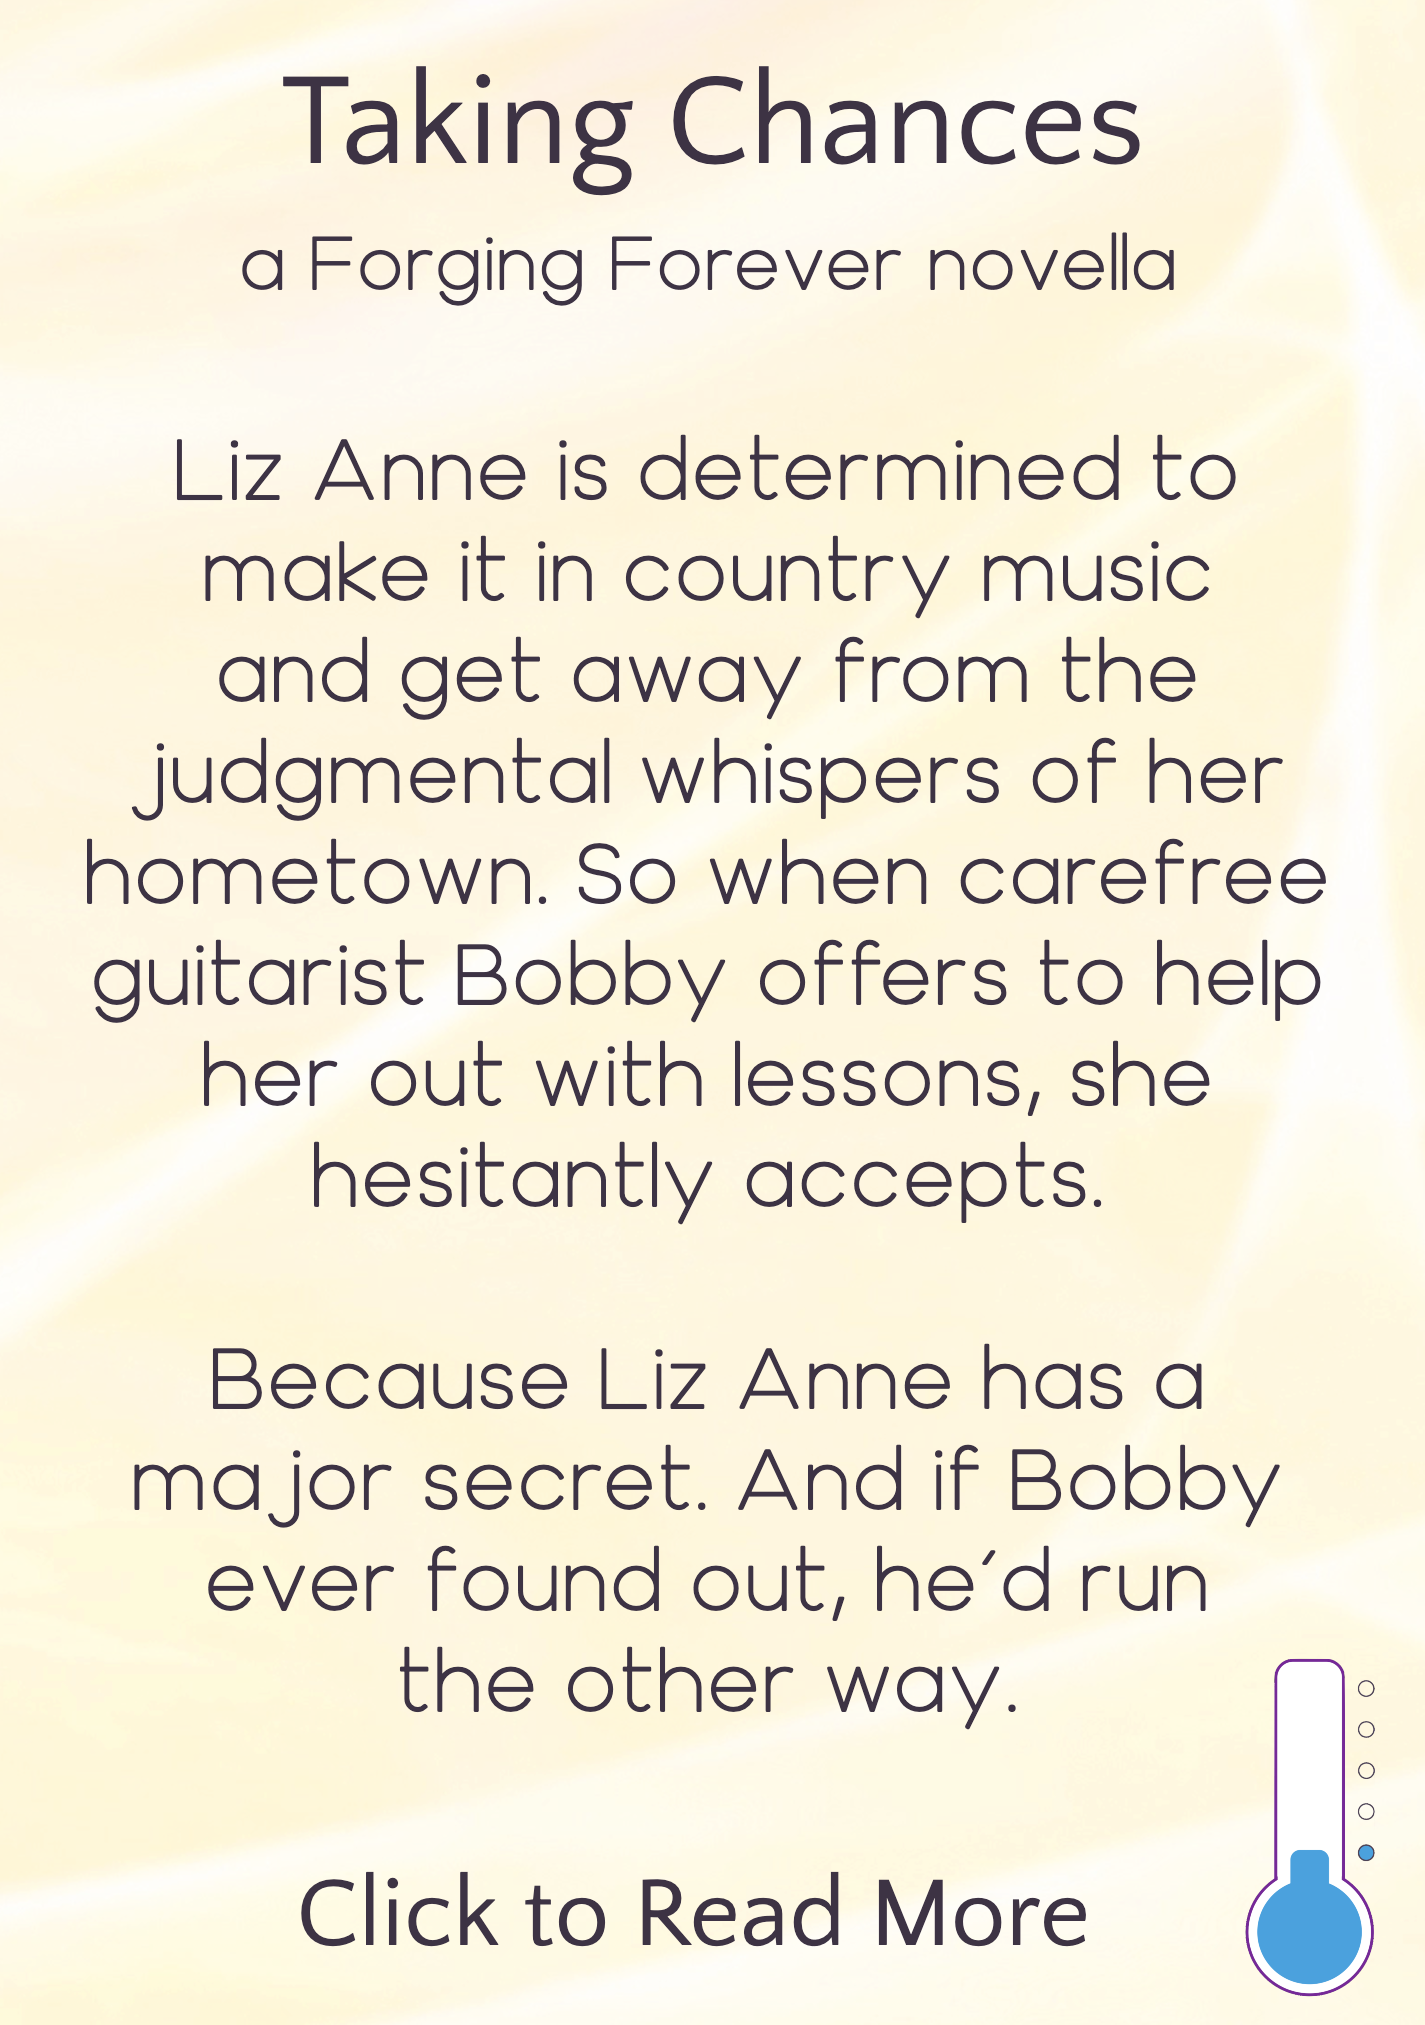 text description appearing on hover, reading: Taking Chances, a Forging Forever novella. Liz Anne is determined to make it in country music and get away from the judgmental whispers of her hometown. So when carefree guitarist Bobby offers to help her out with lessons, she hesitantly accepts. Because Liz Anne has a major secret. And if Bobby ever found out, he'd run the other way. Click to read more. Icon in bottom right indicating heat level is "sweet"